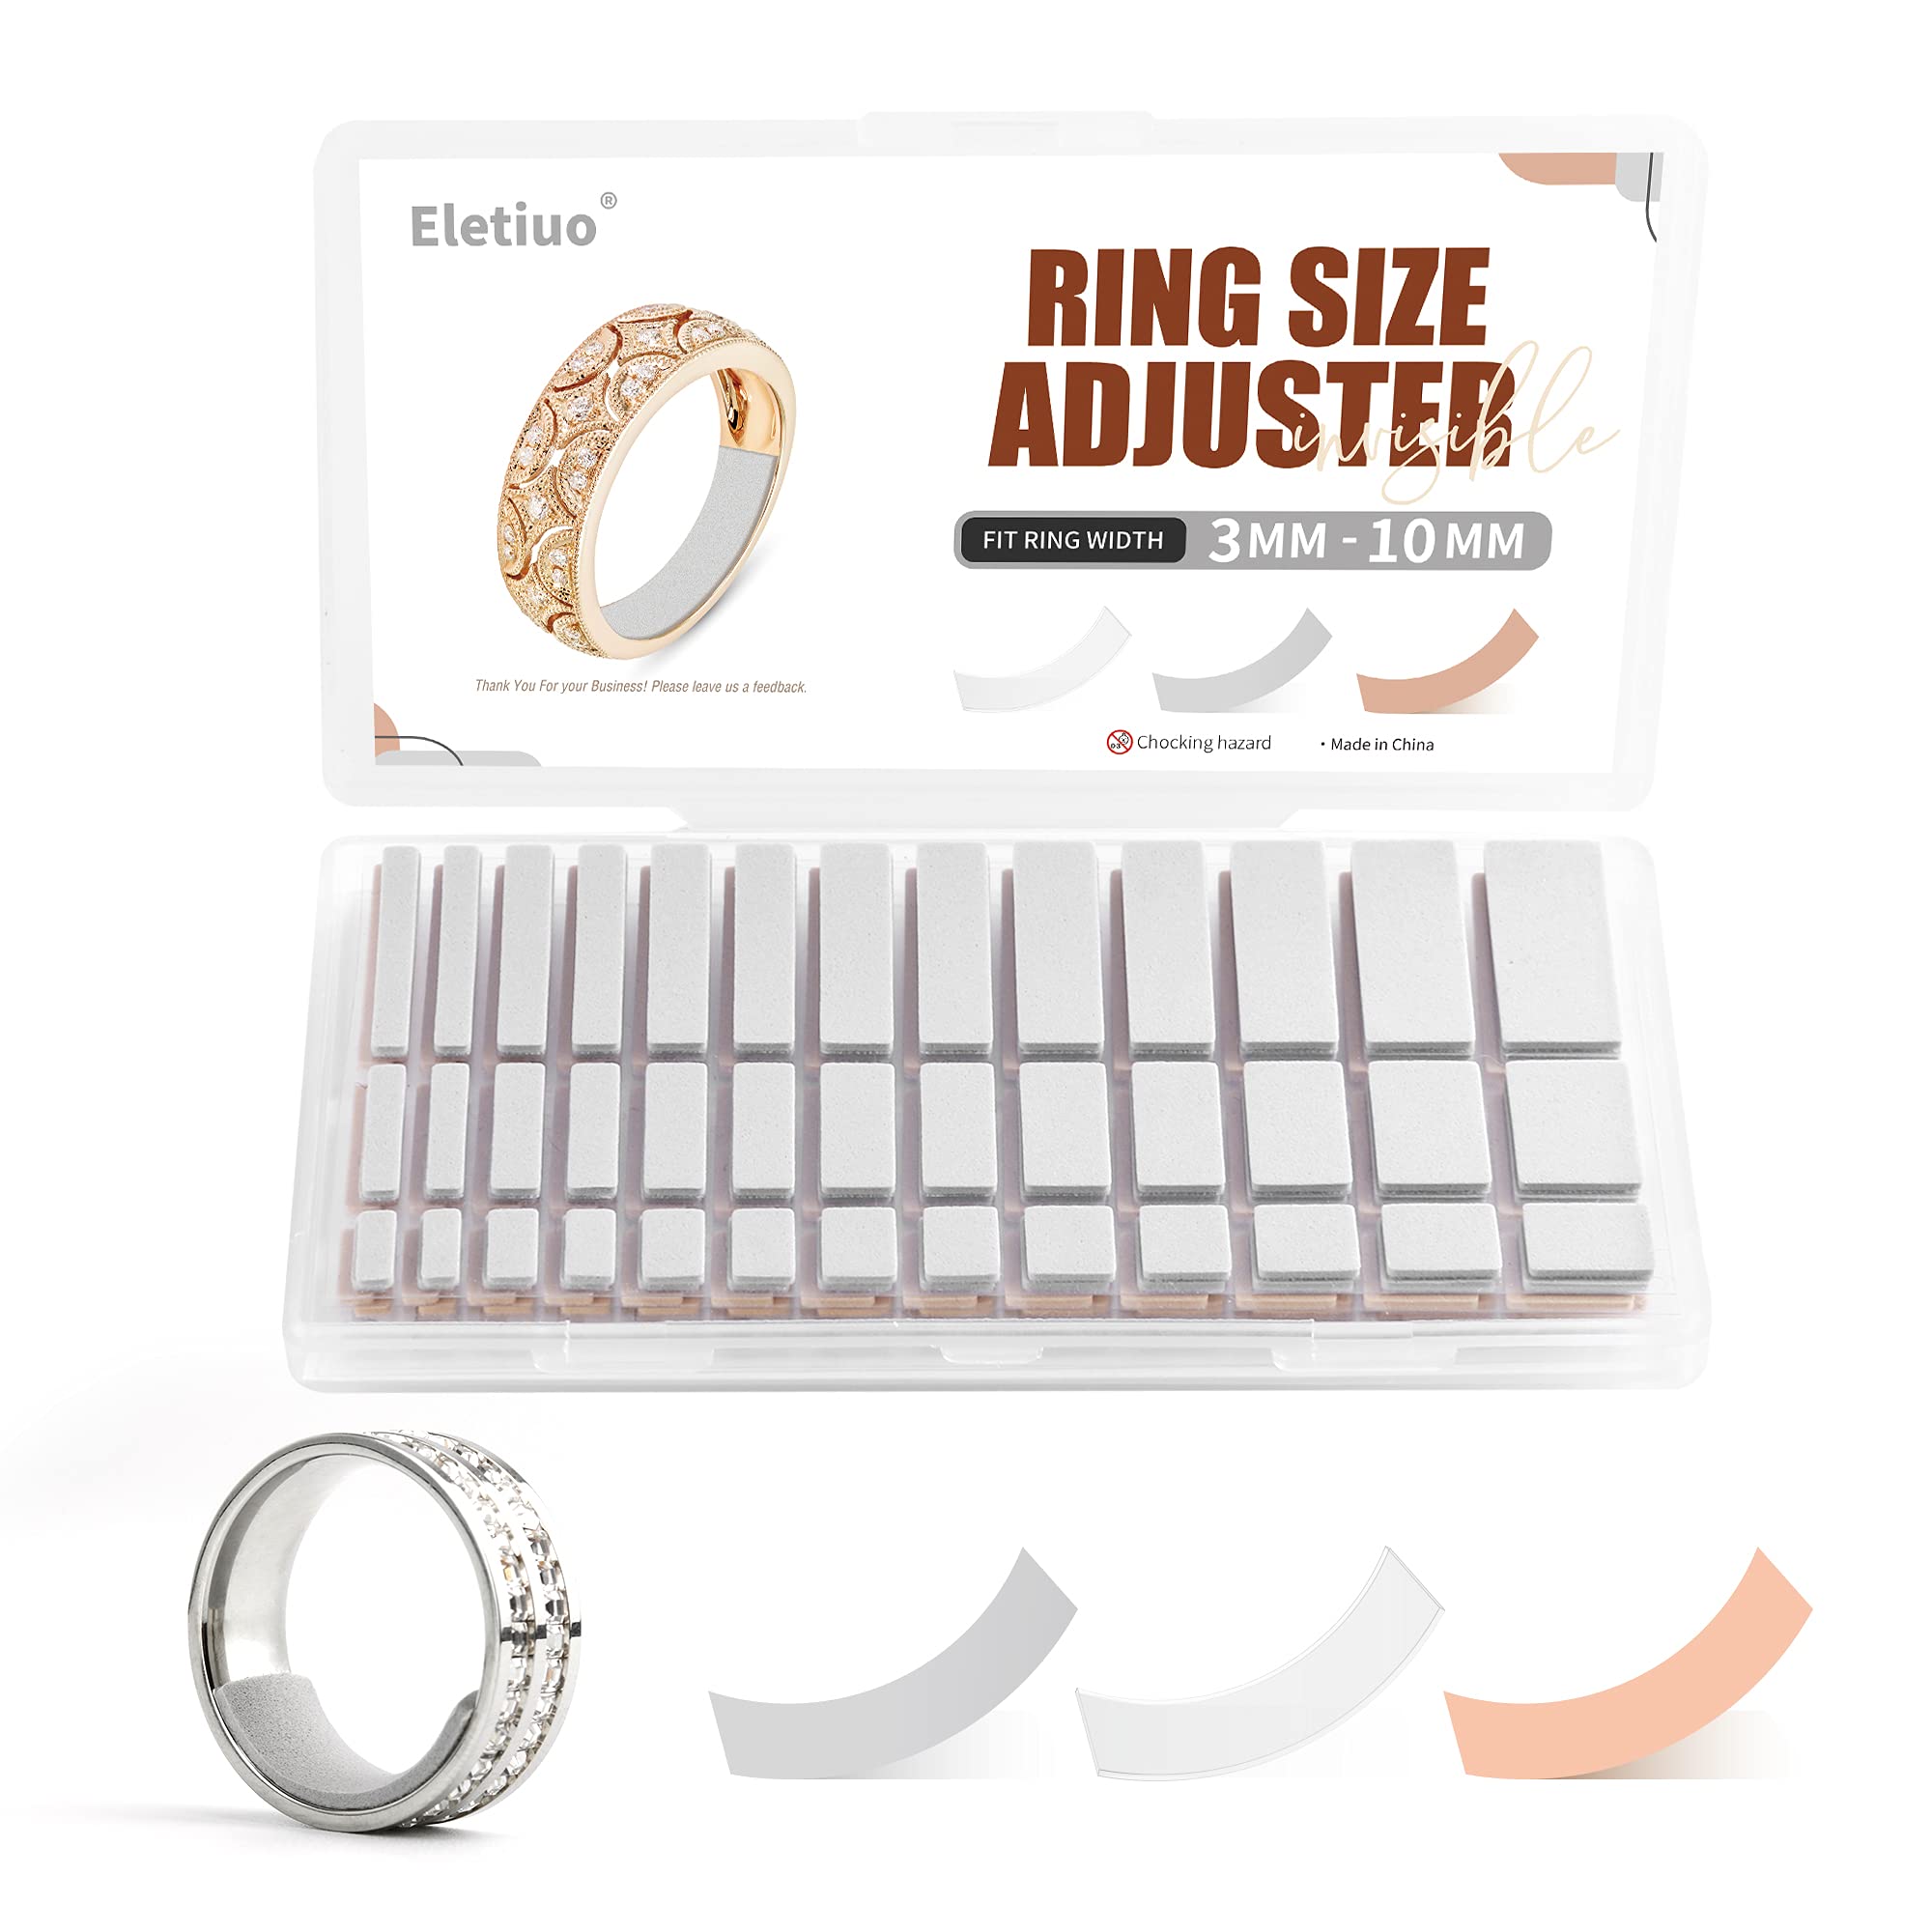 8 Sizes Silicone Anti Lost Invisible Clear Ring Resizer Loose Rings Reducer  Ring Sizer Fit Any Rings Jewelry Tools